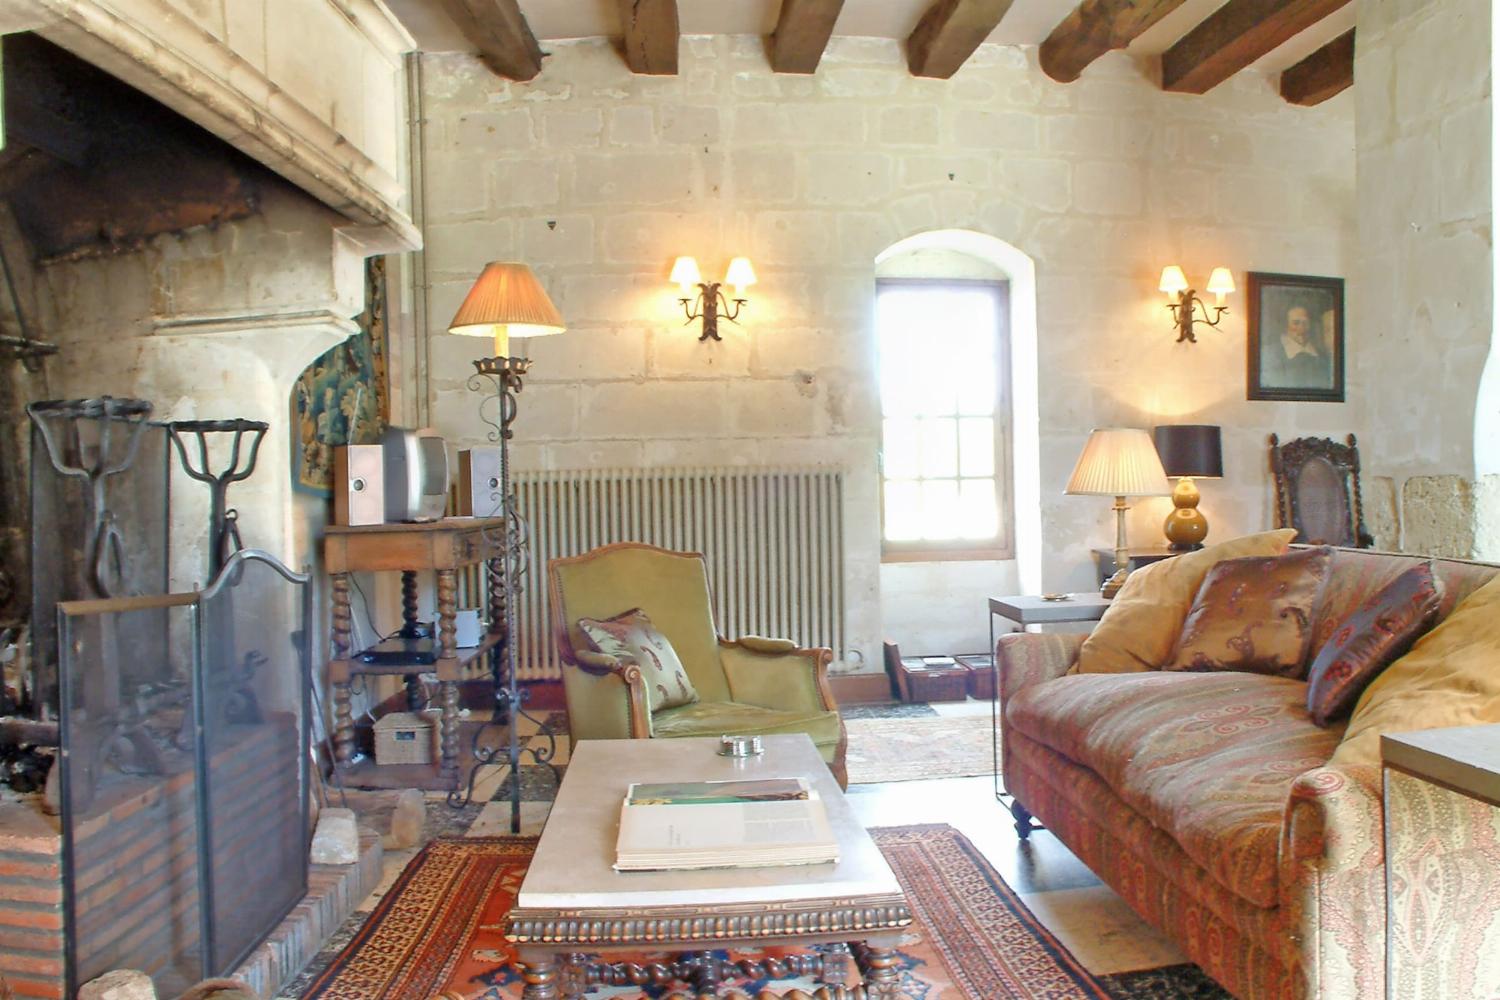 Living room | Holiday home in the Loire Valley